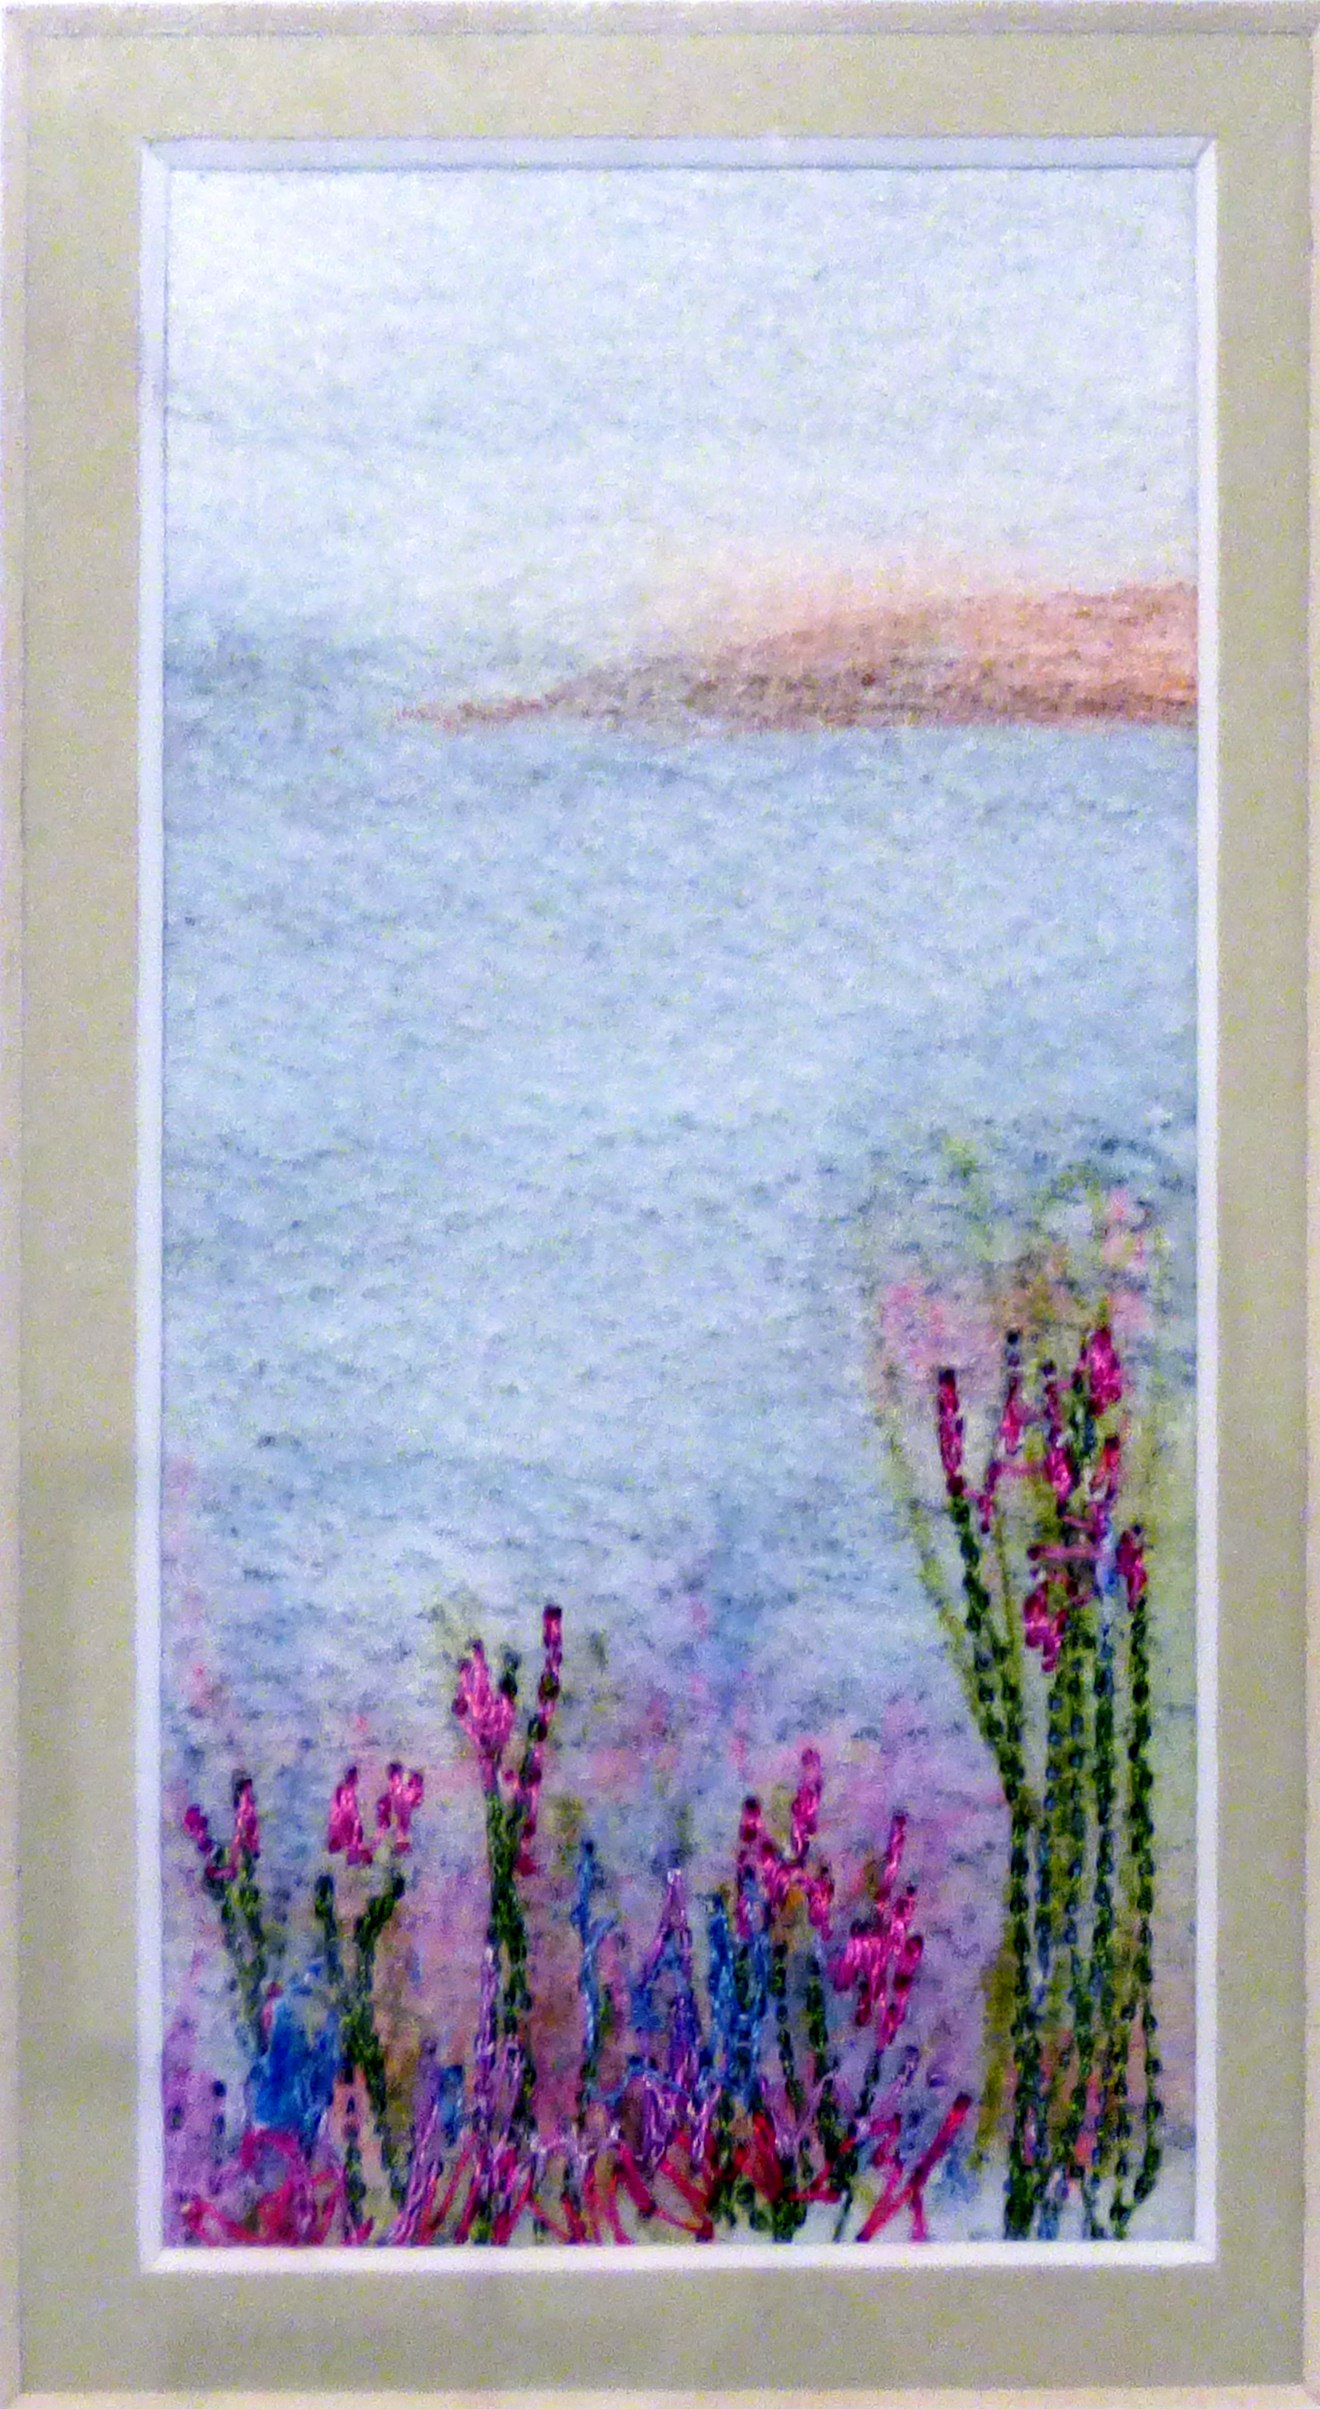 ON THE CLIFF by Joan Norton, free machine stitching on a watercolour painting, ConText group 2018